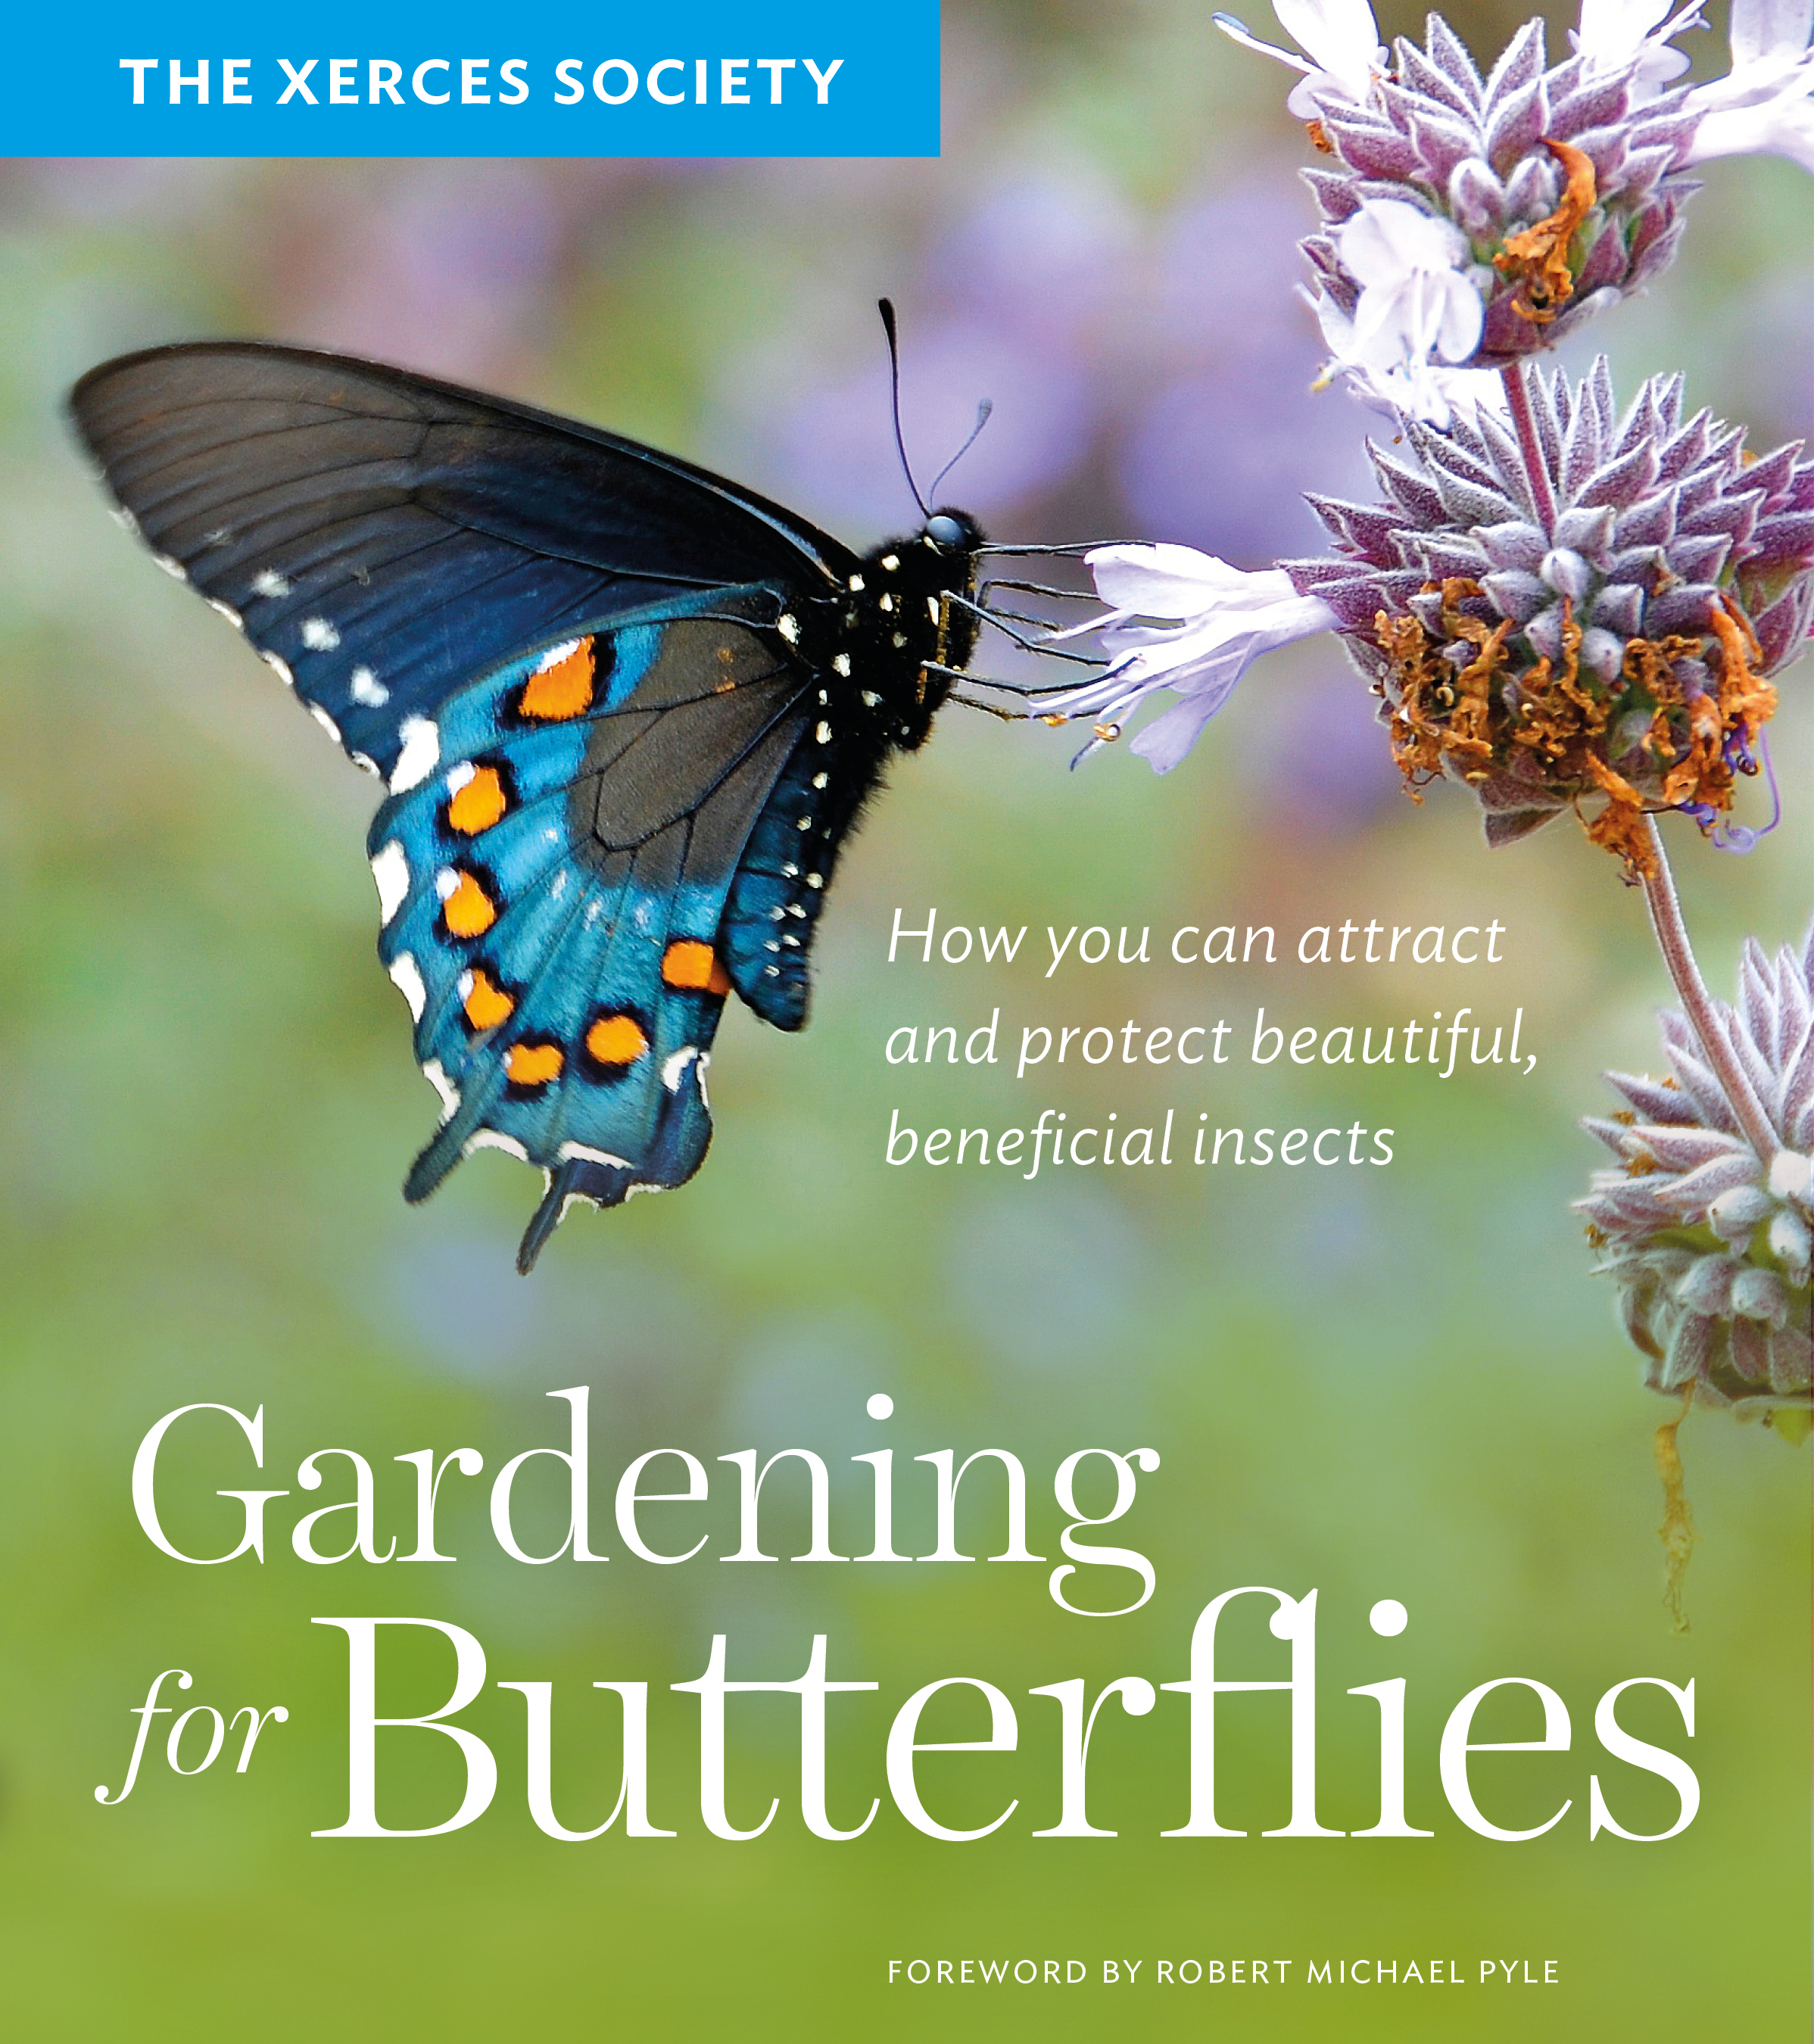 The　Gardening　Book　for　Butterflies　Group　Society　by　Xerces　Hachette